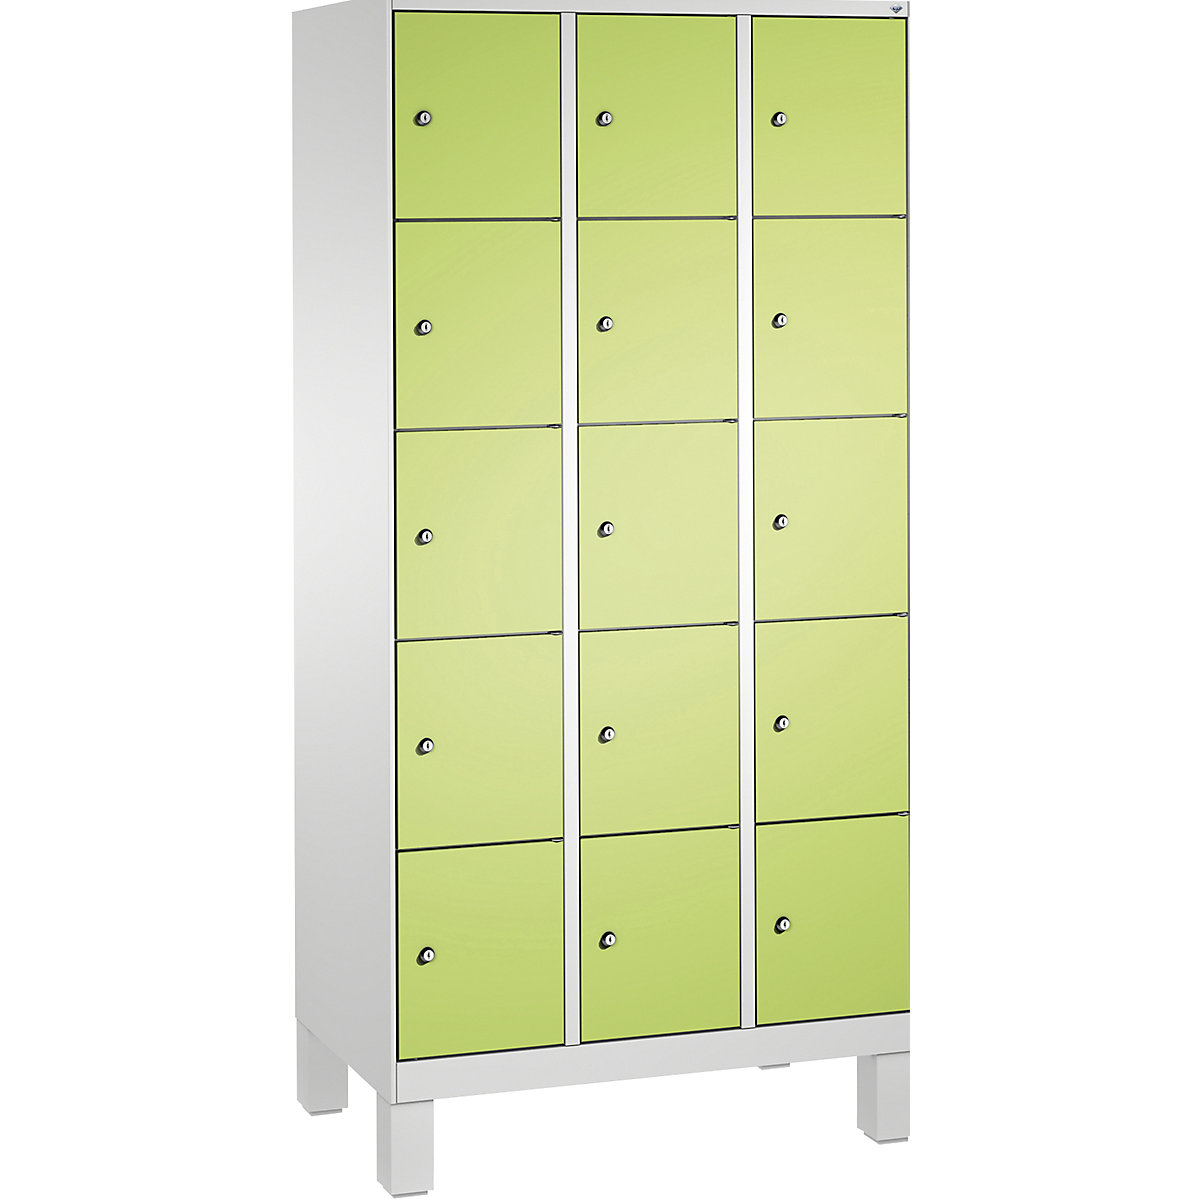 EVOLO locker unit, with feet – C+P, 3 compartments, 5 shelf compartments each, compartment width 300 mm, light grey / viridian green-10